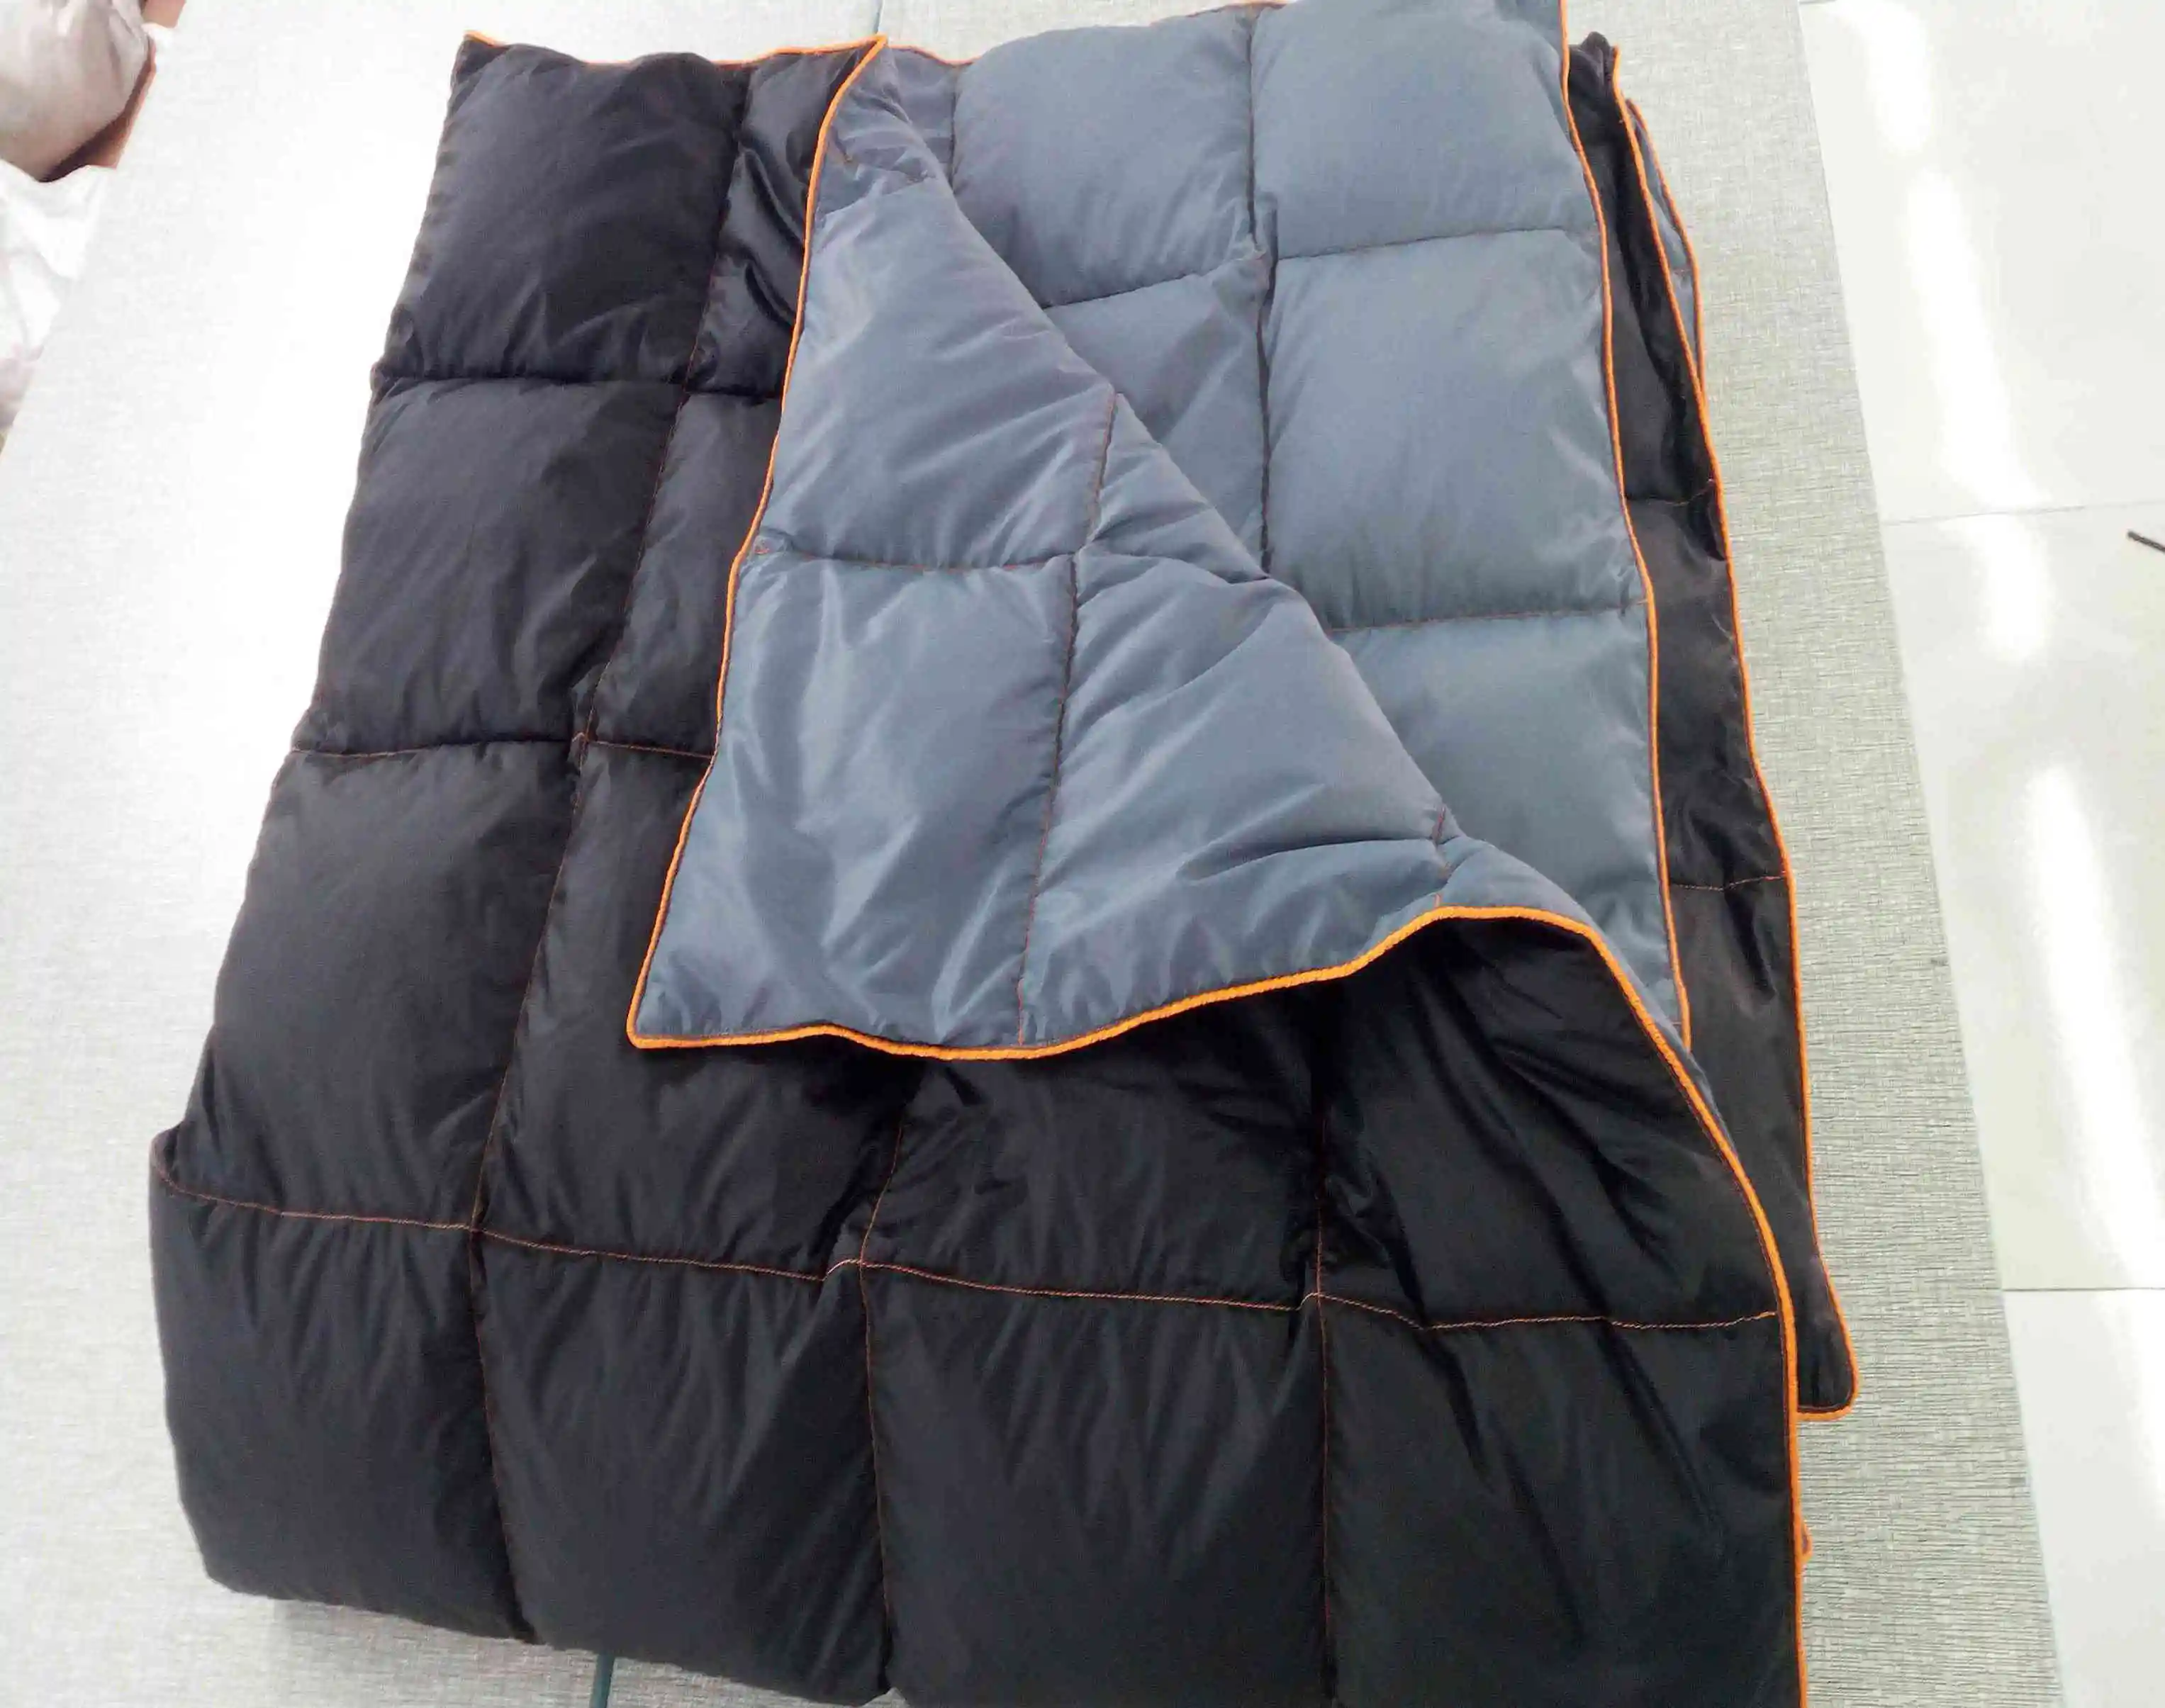 Outdoor Dwr Nylon Fabric Camping Down Blanket Buy Outdoor Dwr Nylon Fabric Camping Down Blanket